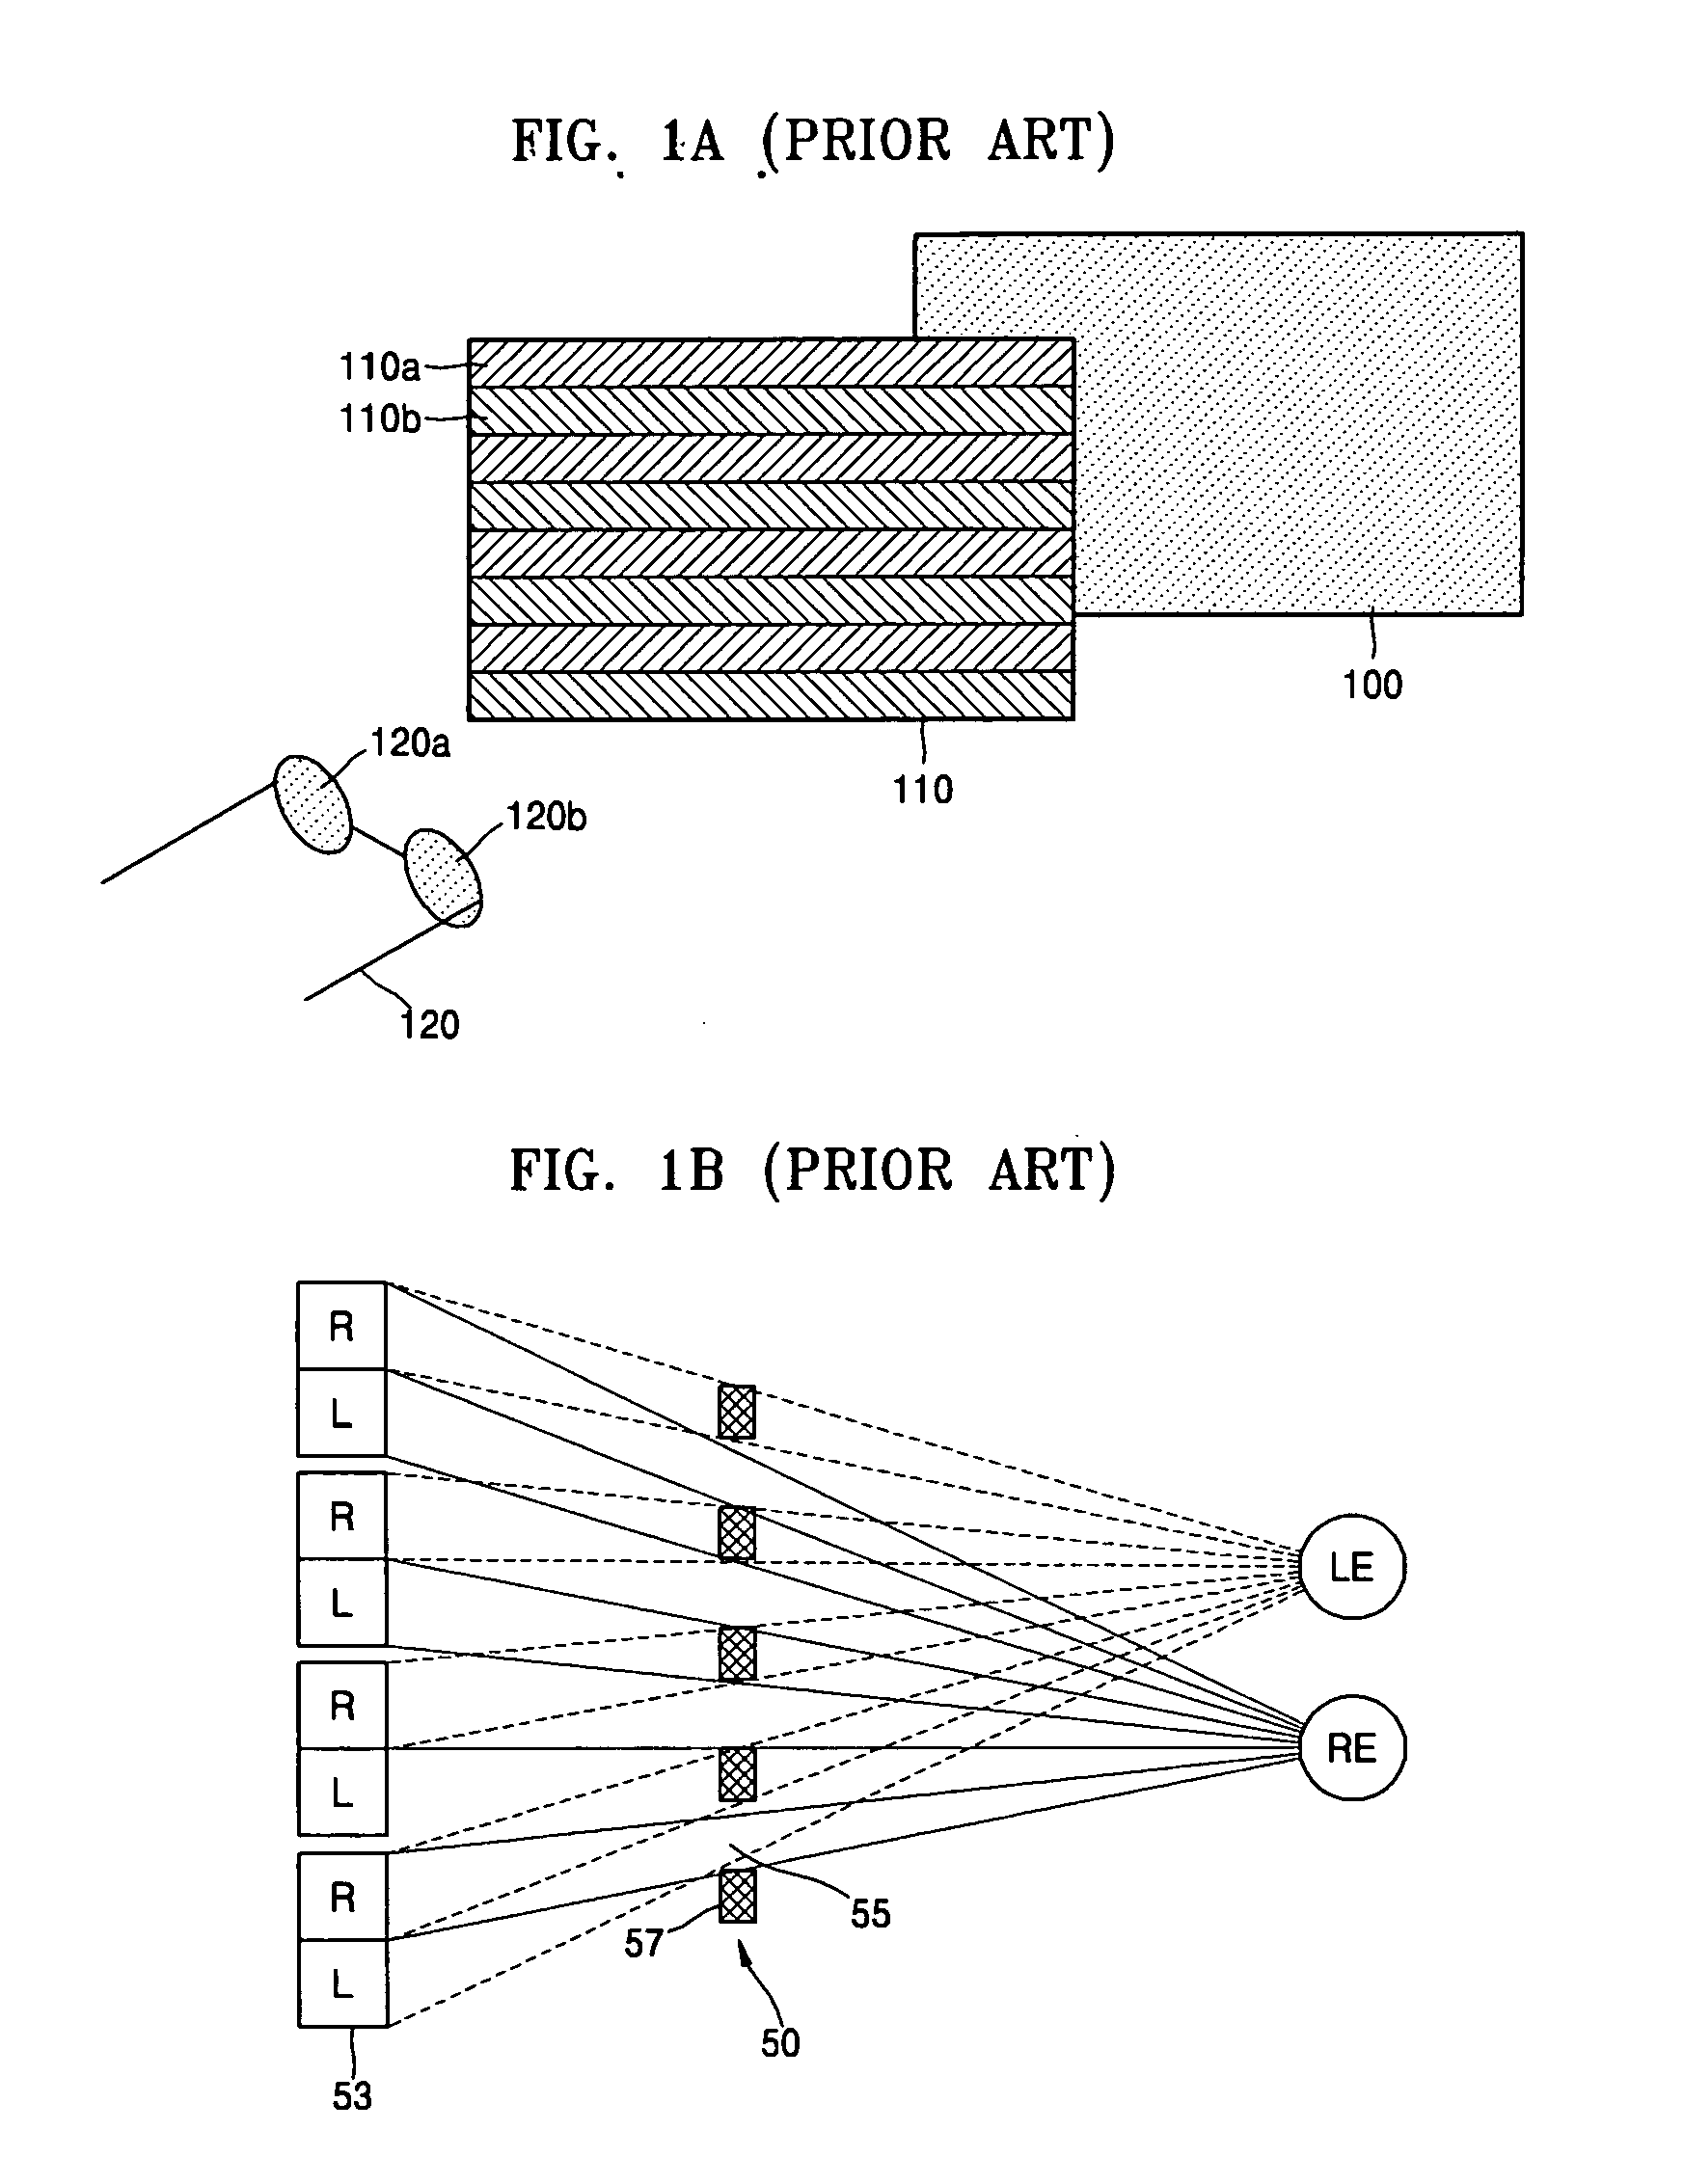 Stereoscopic display switching between 2D/3D images using polarization grating screen